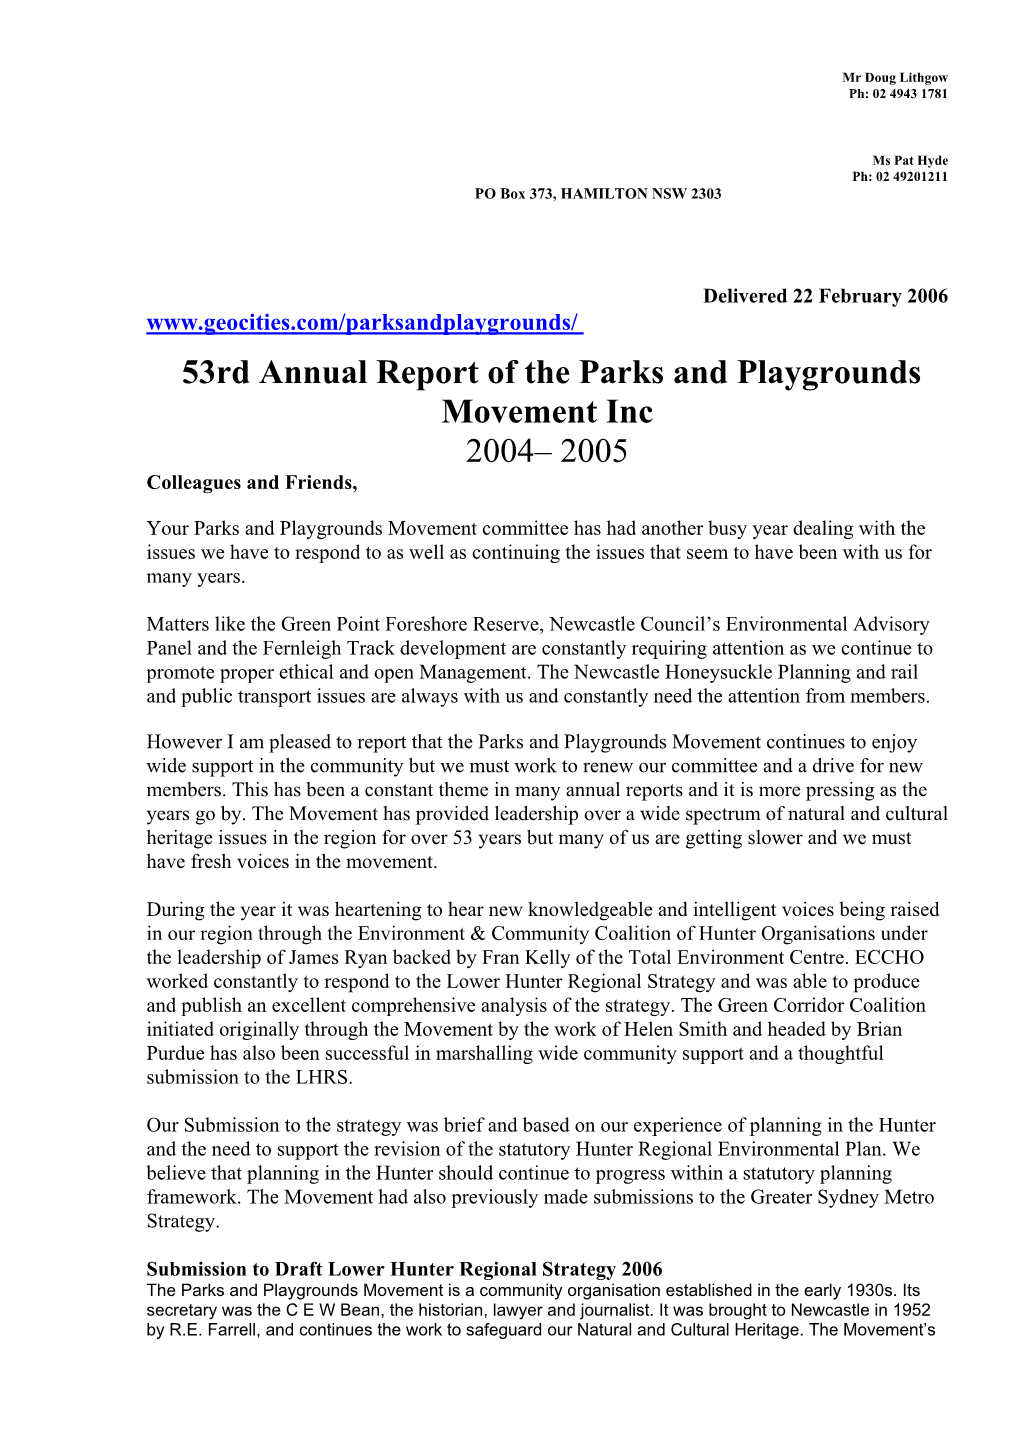 53Rd Annual Report of the Parks and Playgrounds Movement Inc 2004– 2005 Colleagues and Friends